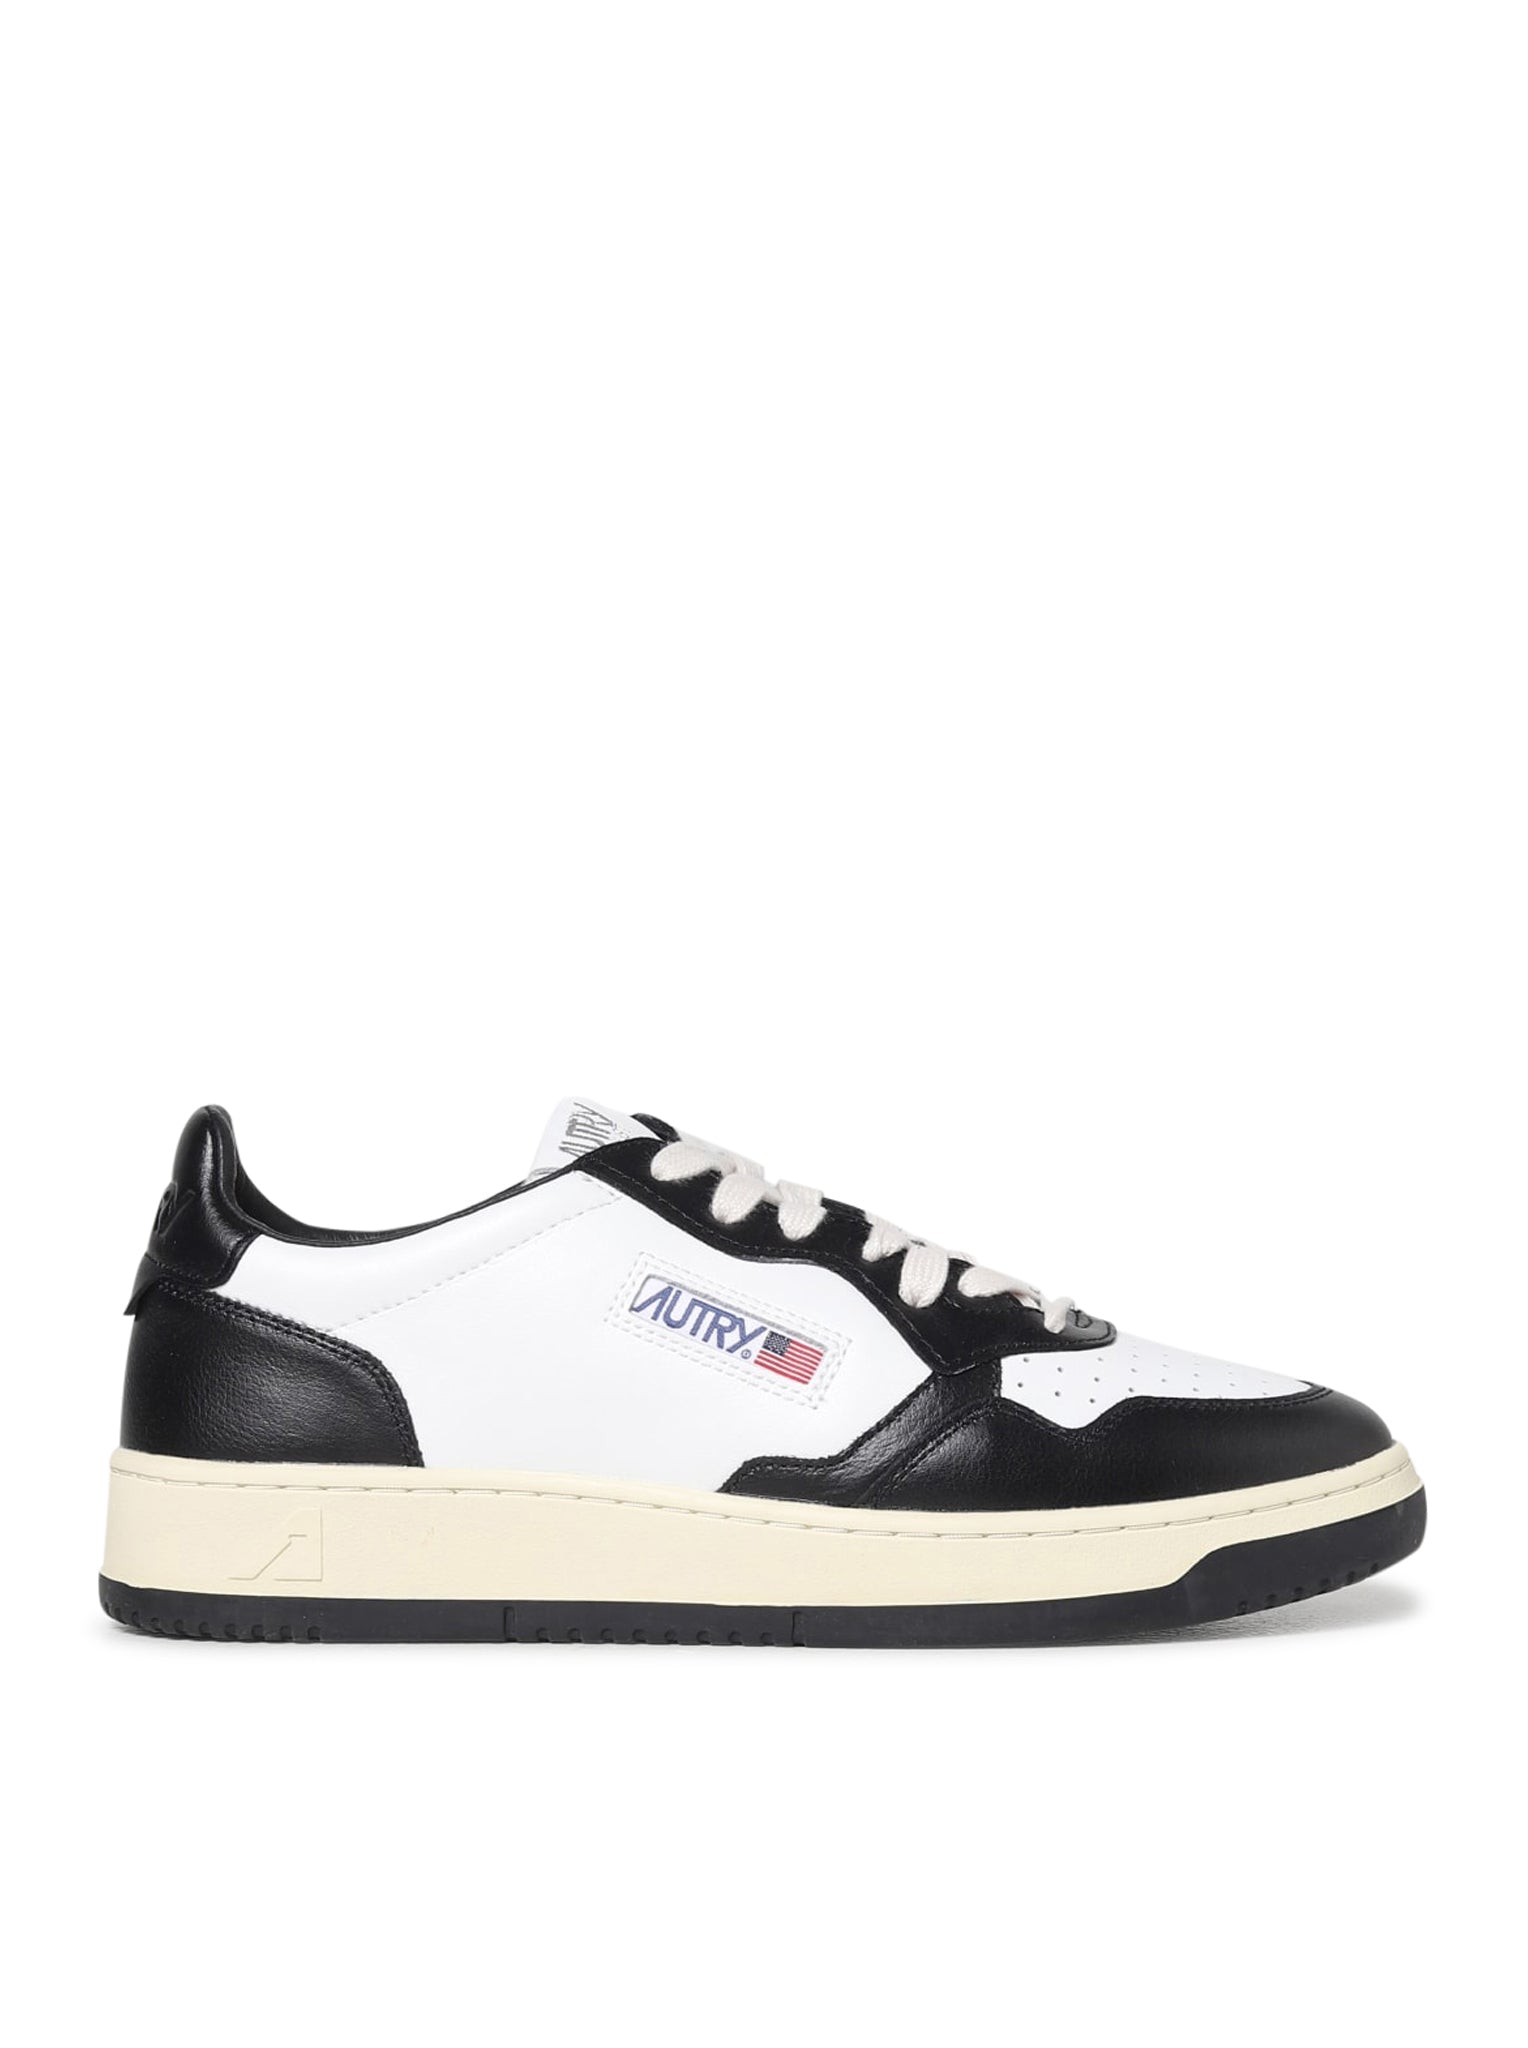 MEDALIST LOW SNEAKERS IN WHITE BLACK LEATHER